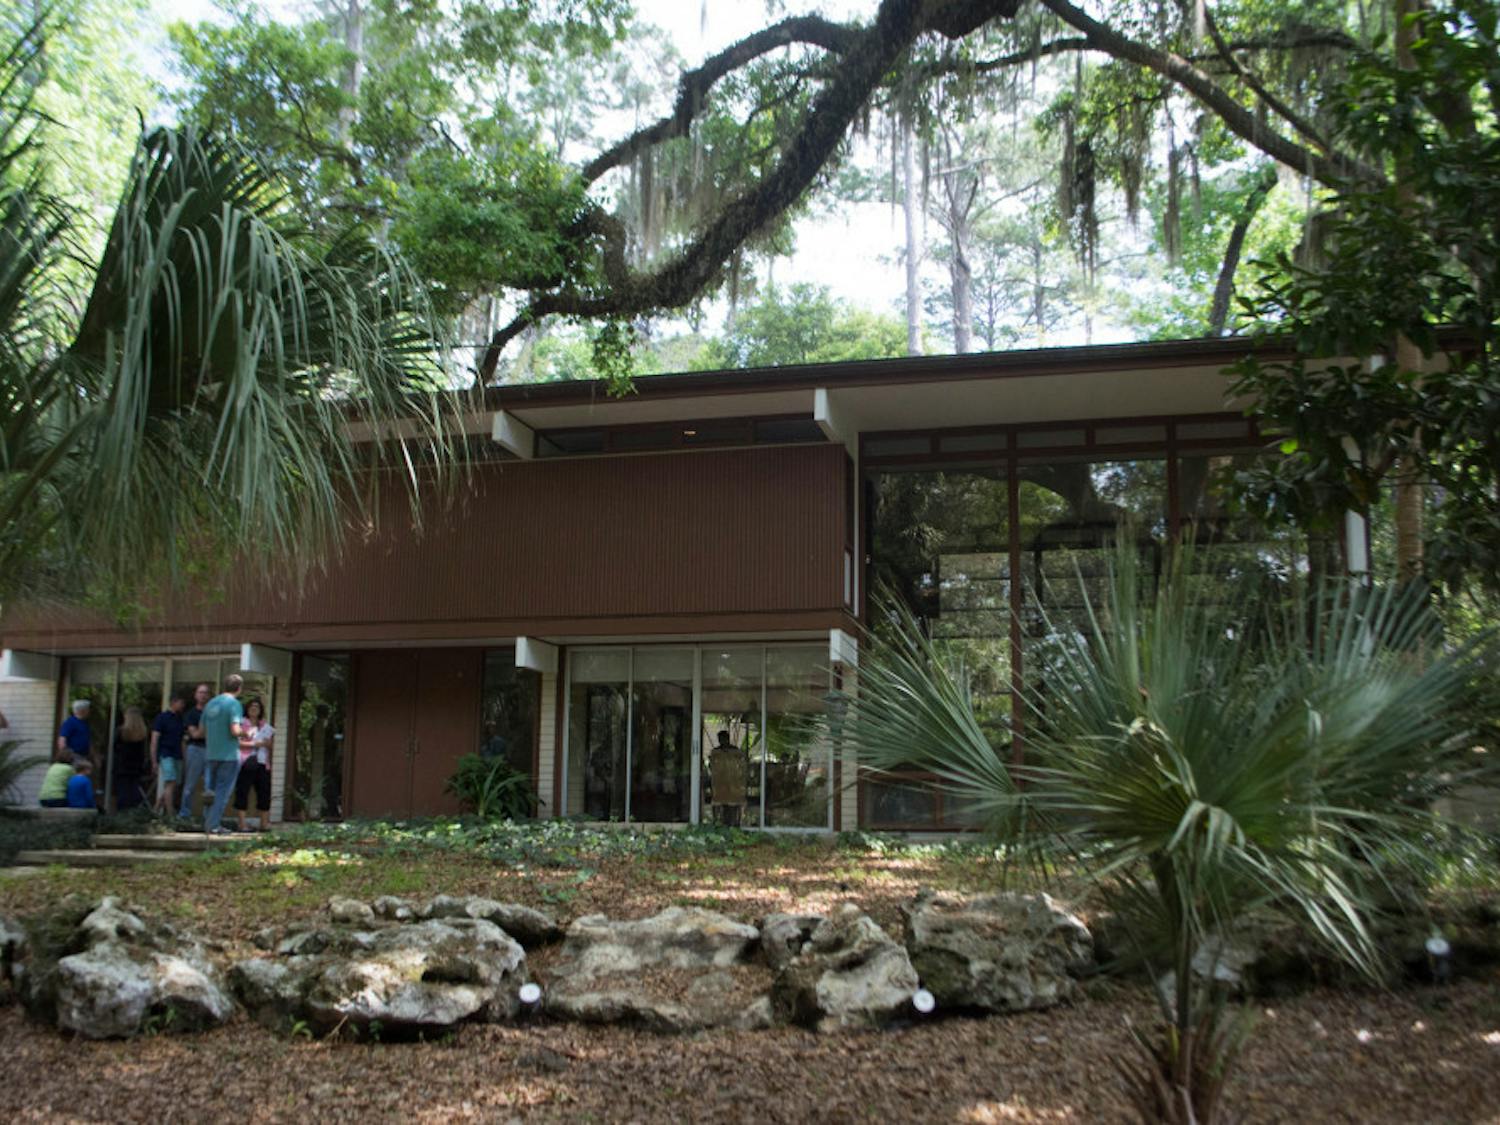 The 3105 SW 5th Court house was one of the six mid-century modern homes featured on the Gainesville Modern Weekend tour on Saturday. Each house had contractors and/or the homeowners on-site to answer questions. 